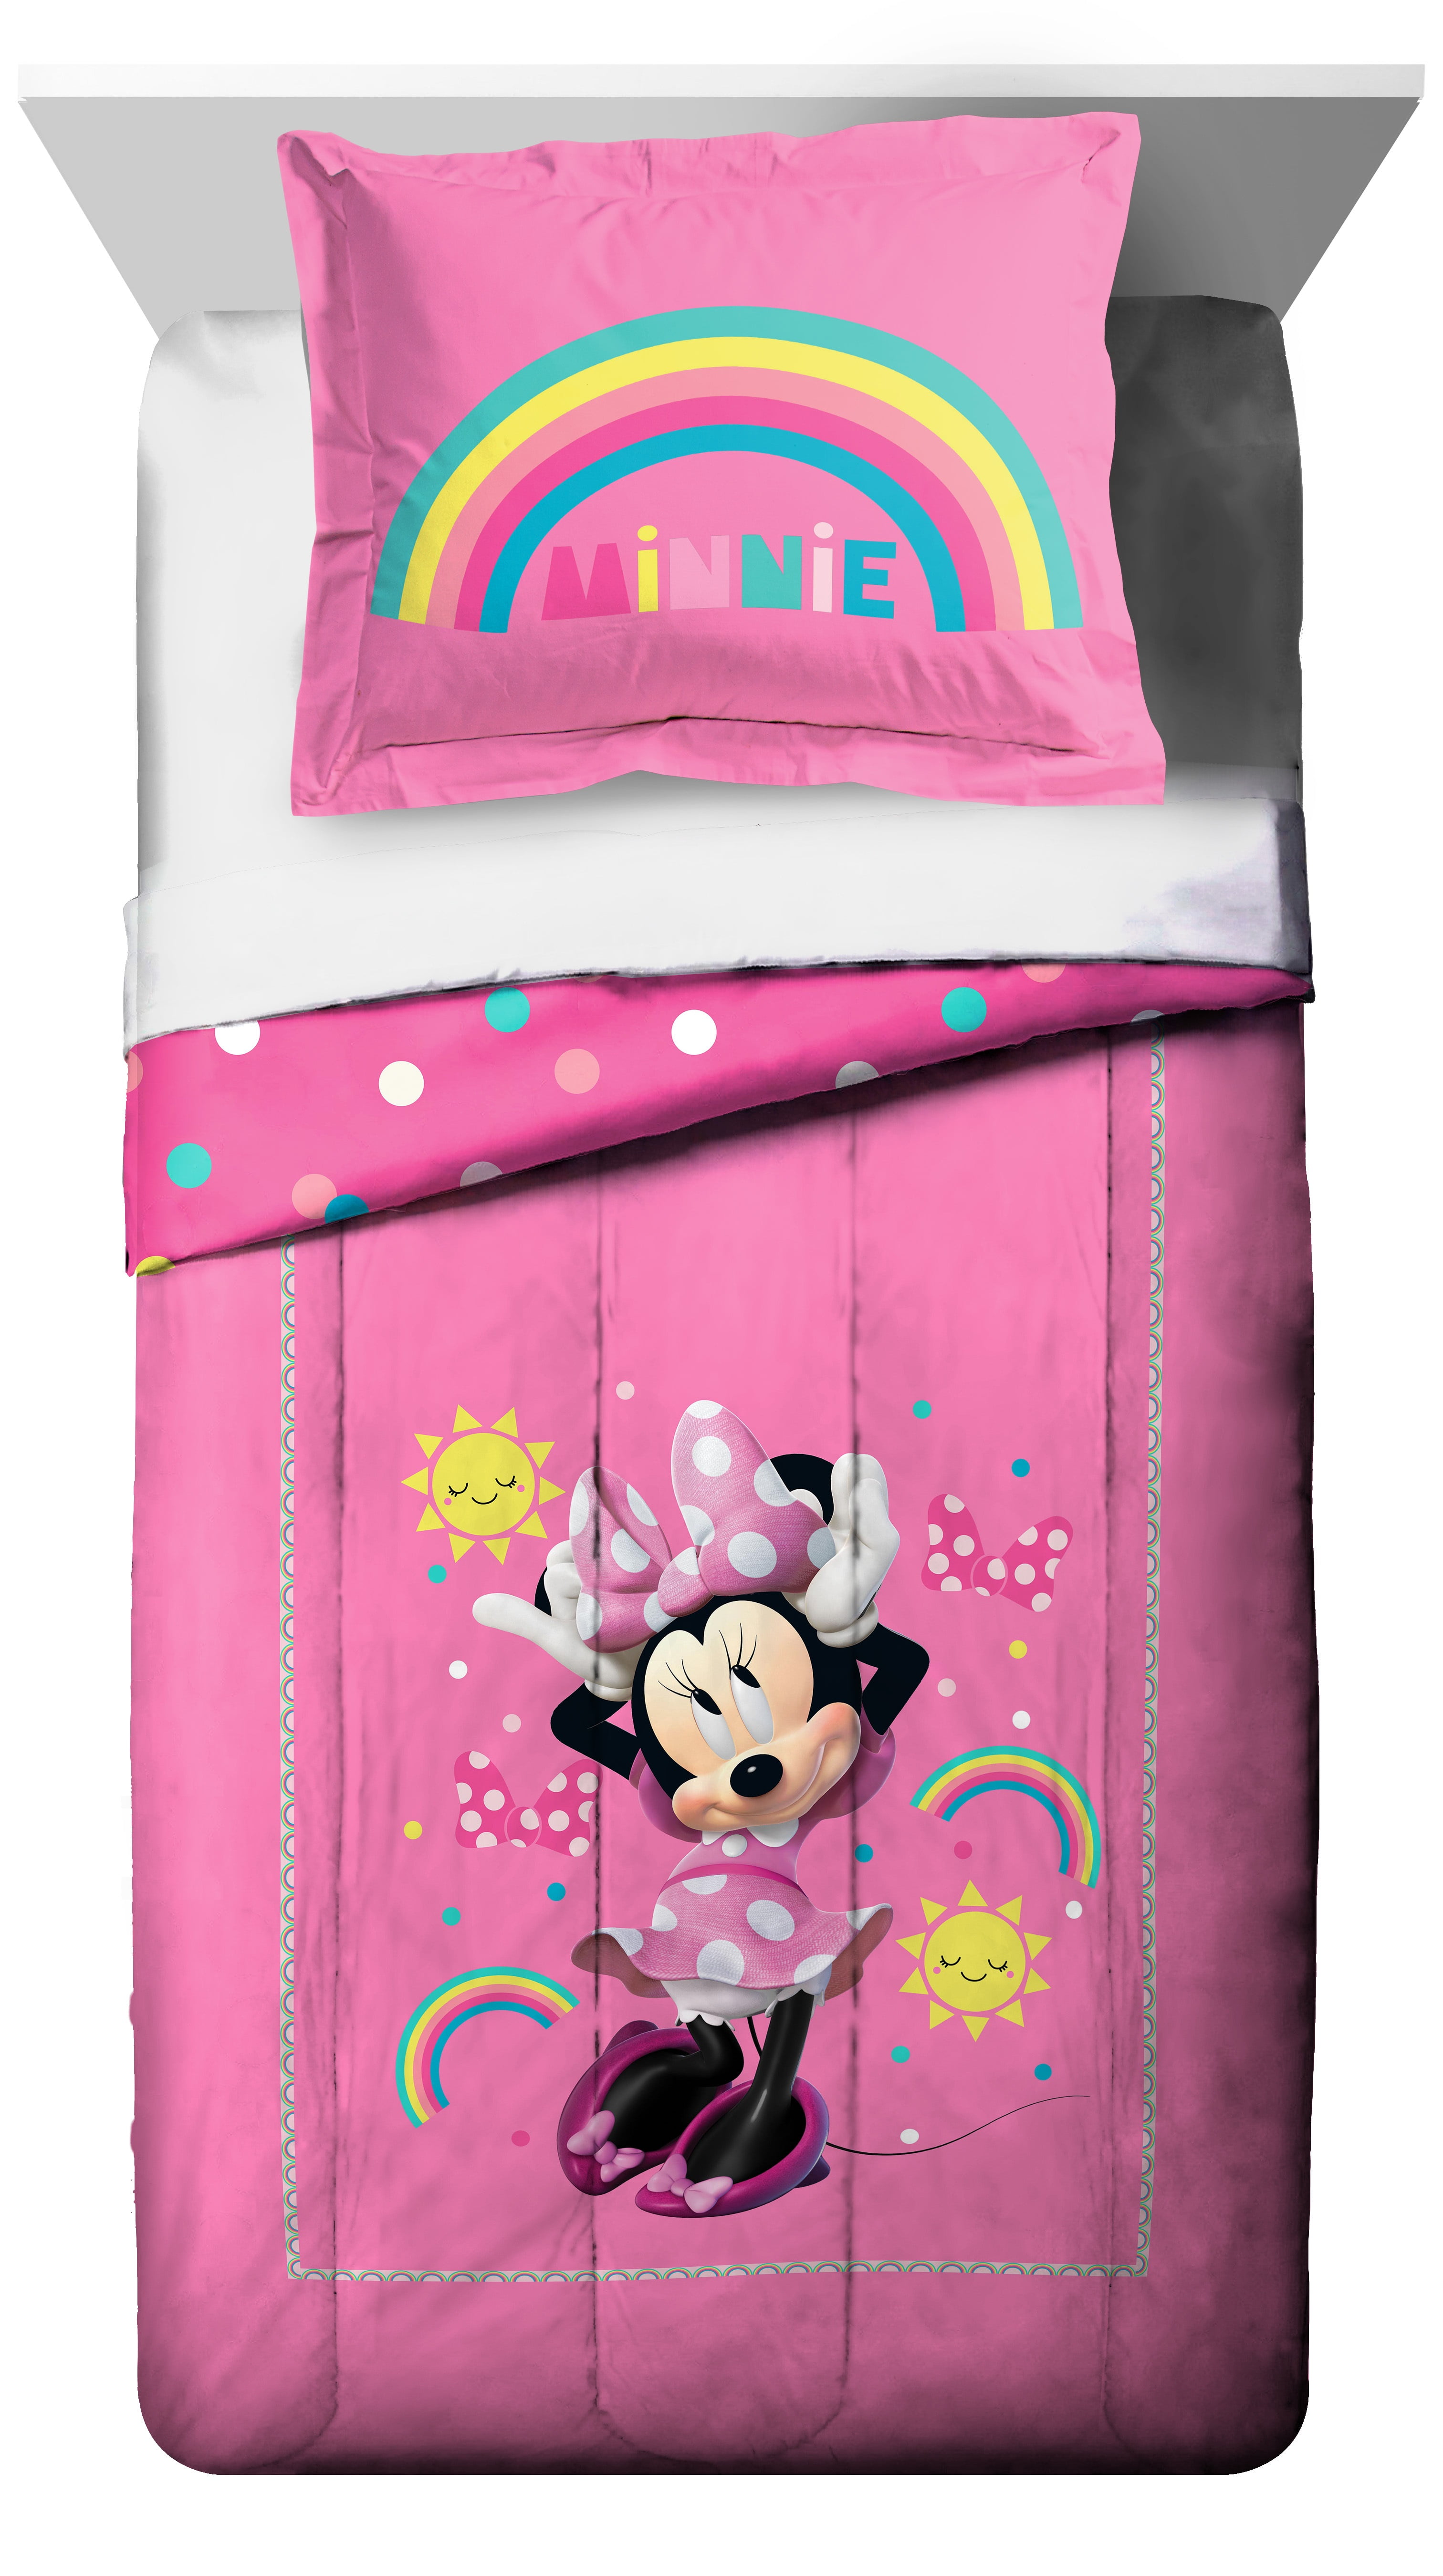 2 Piece Disney Minnie Mouse Twin/Full Comforter and Sham Set 